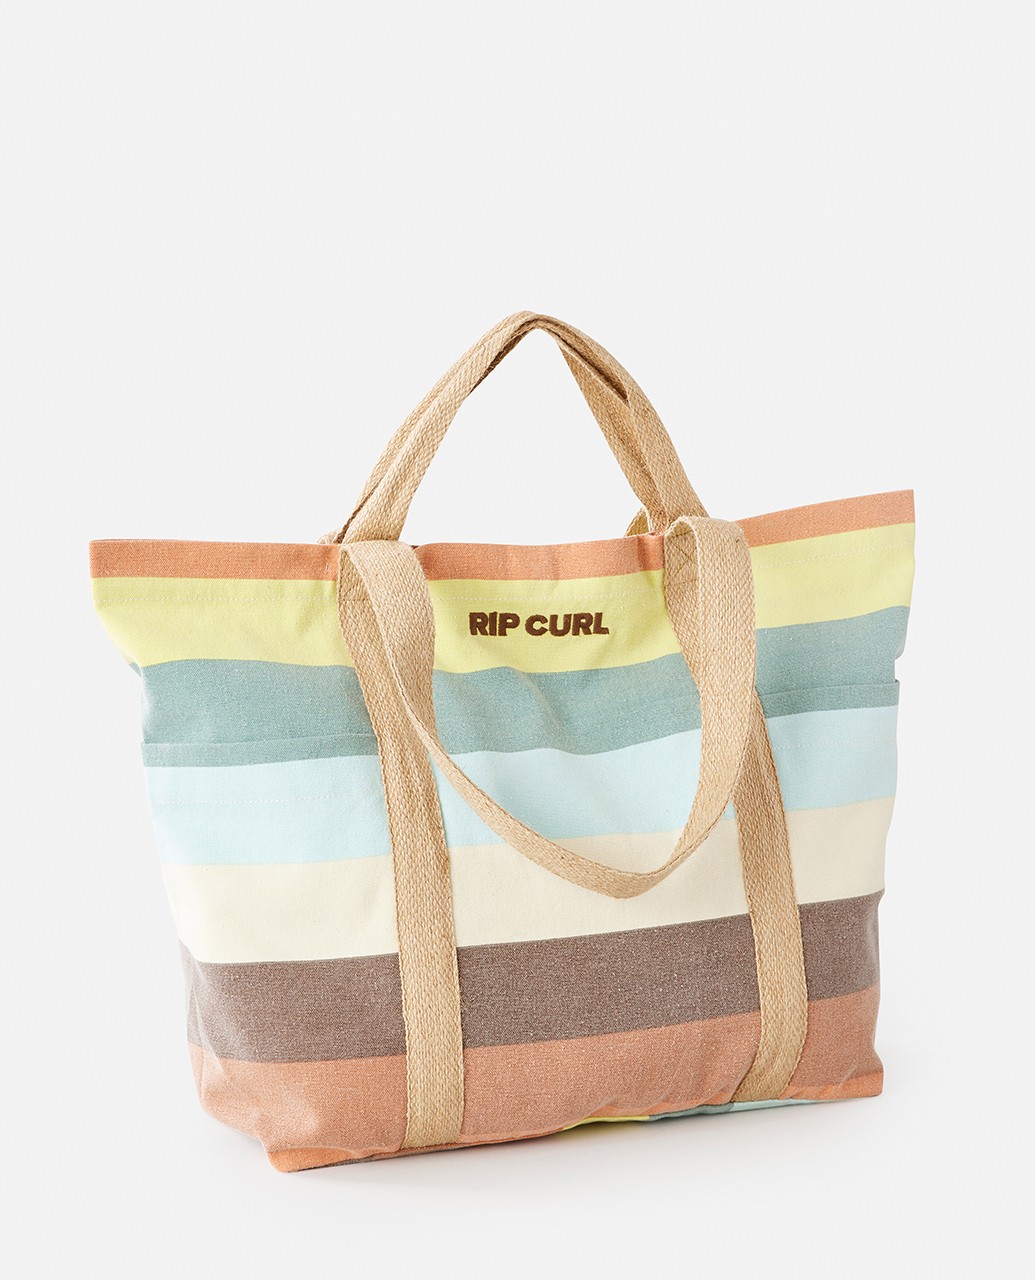 RIP CURL BAGS COLLECTION DISTRIBUTED EUROPE & AUSTRALIA on Behance